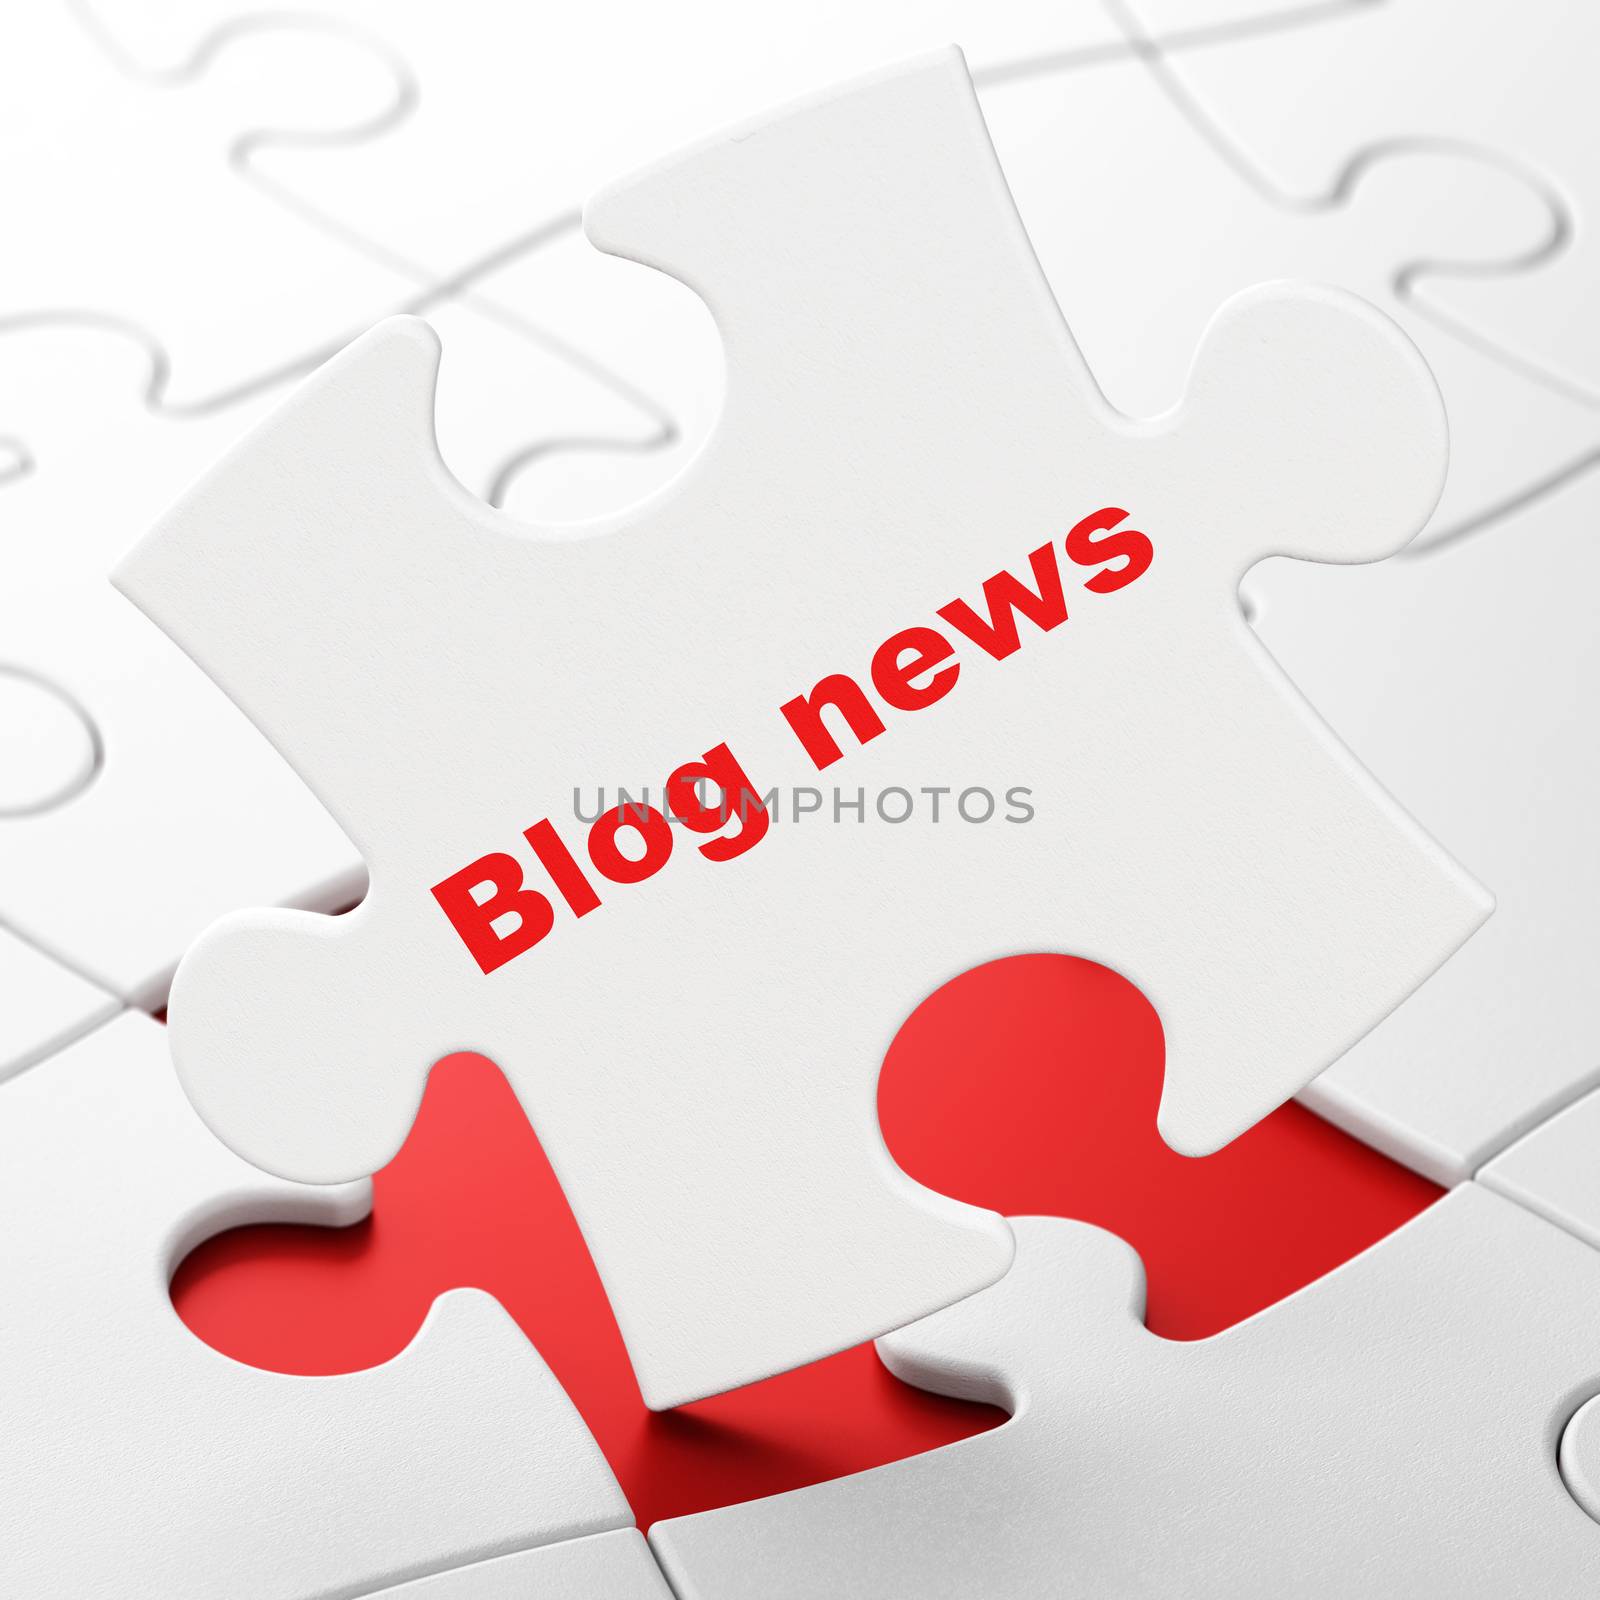 News concept: Blog News on White puzzle pieces background, 3D rendering